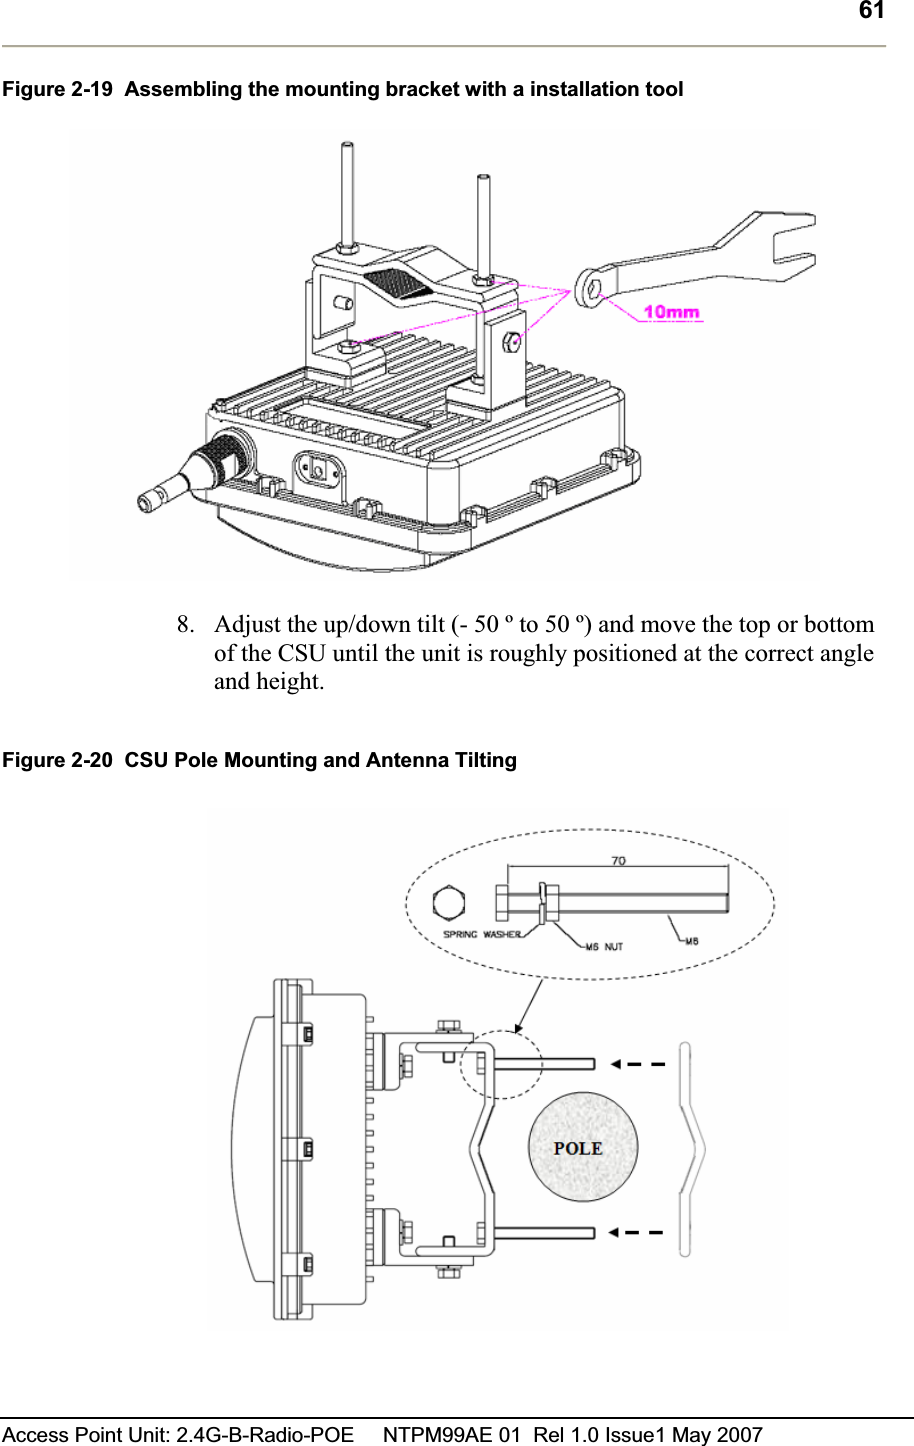 61Access Point Unit: 2.4G-B-Radio-POE     NTPM99AE 01  Rel 1.0 Issue1 May 2007 Figure 2-19  Assembling the mounting bracket with a installation tool 8. Adjust the up/down tilt (- 50 º to 50 º) and move the top or bottom of the CSU until the unit is roughly positioned at the correct angle and height. Figure 2-20  CSU Pole Mounting and Antenna Tilting  